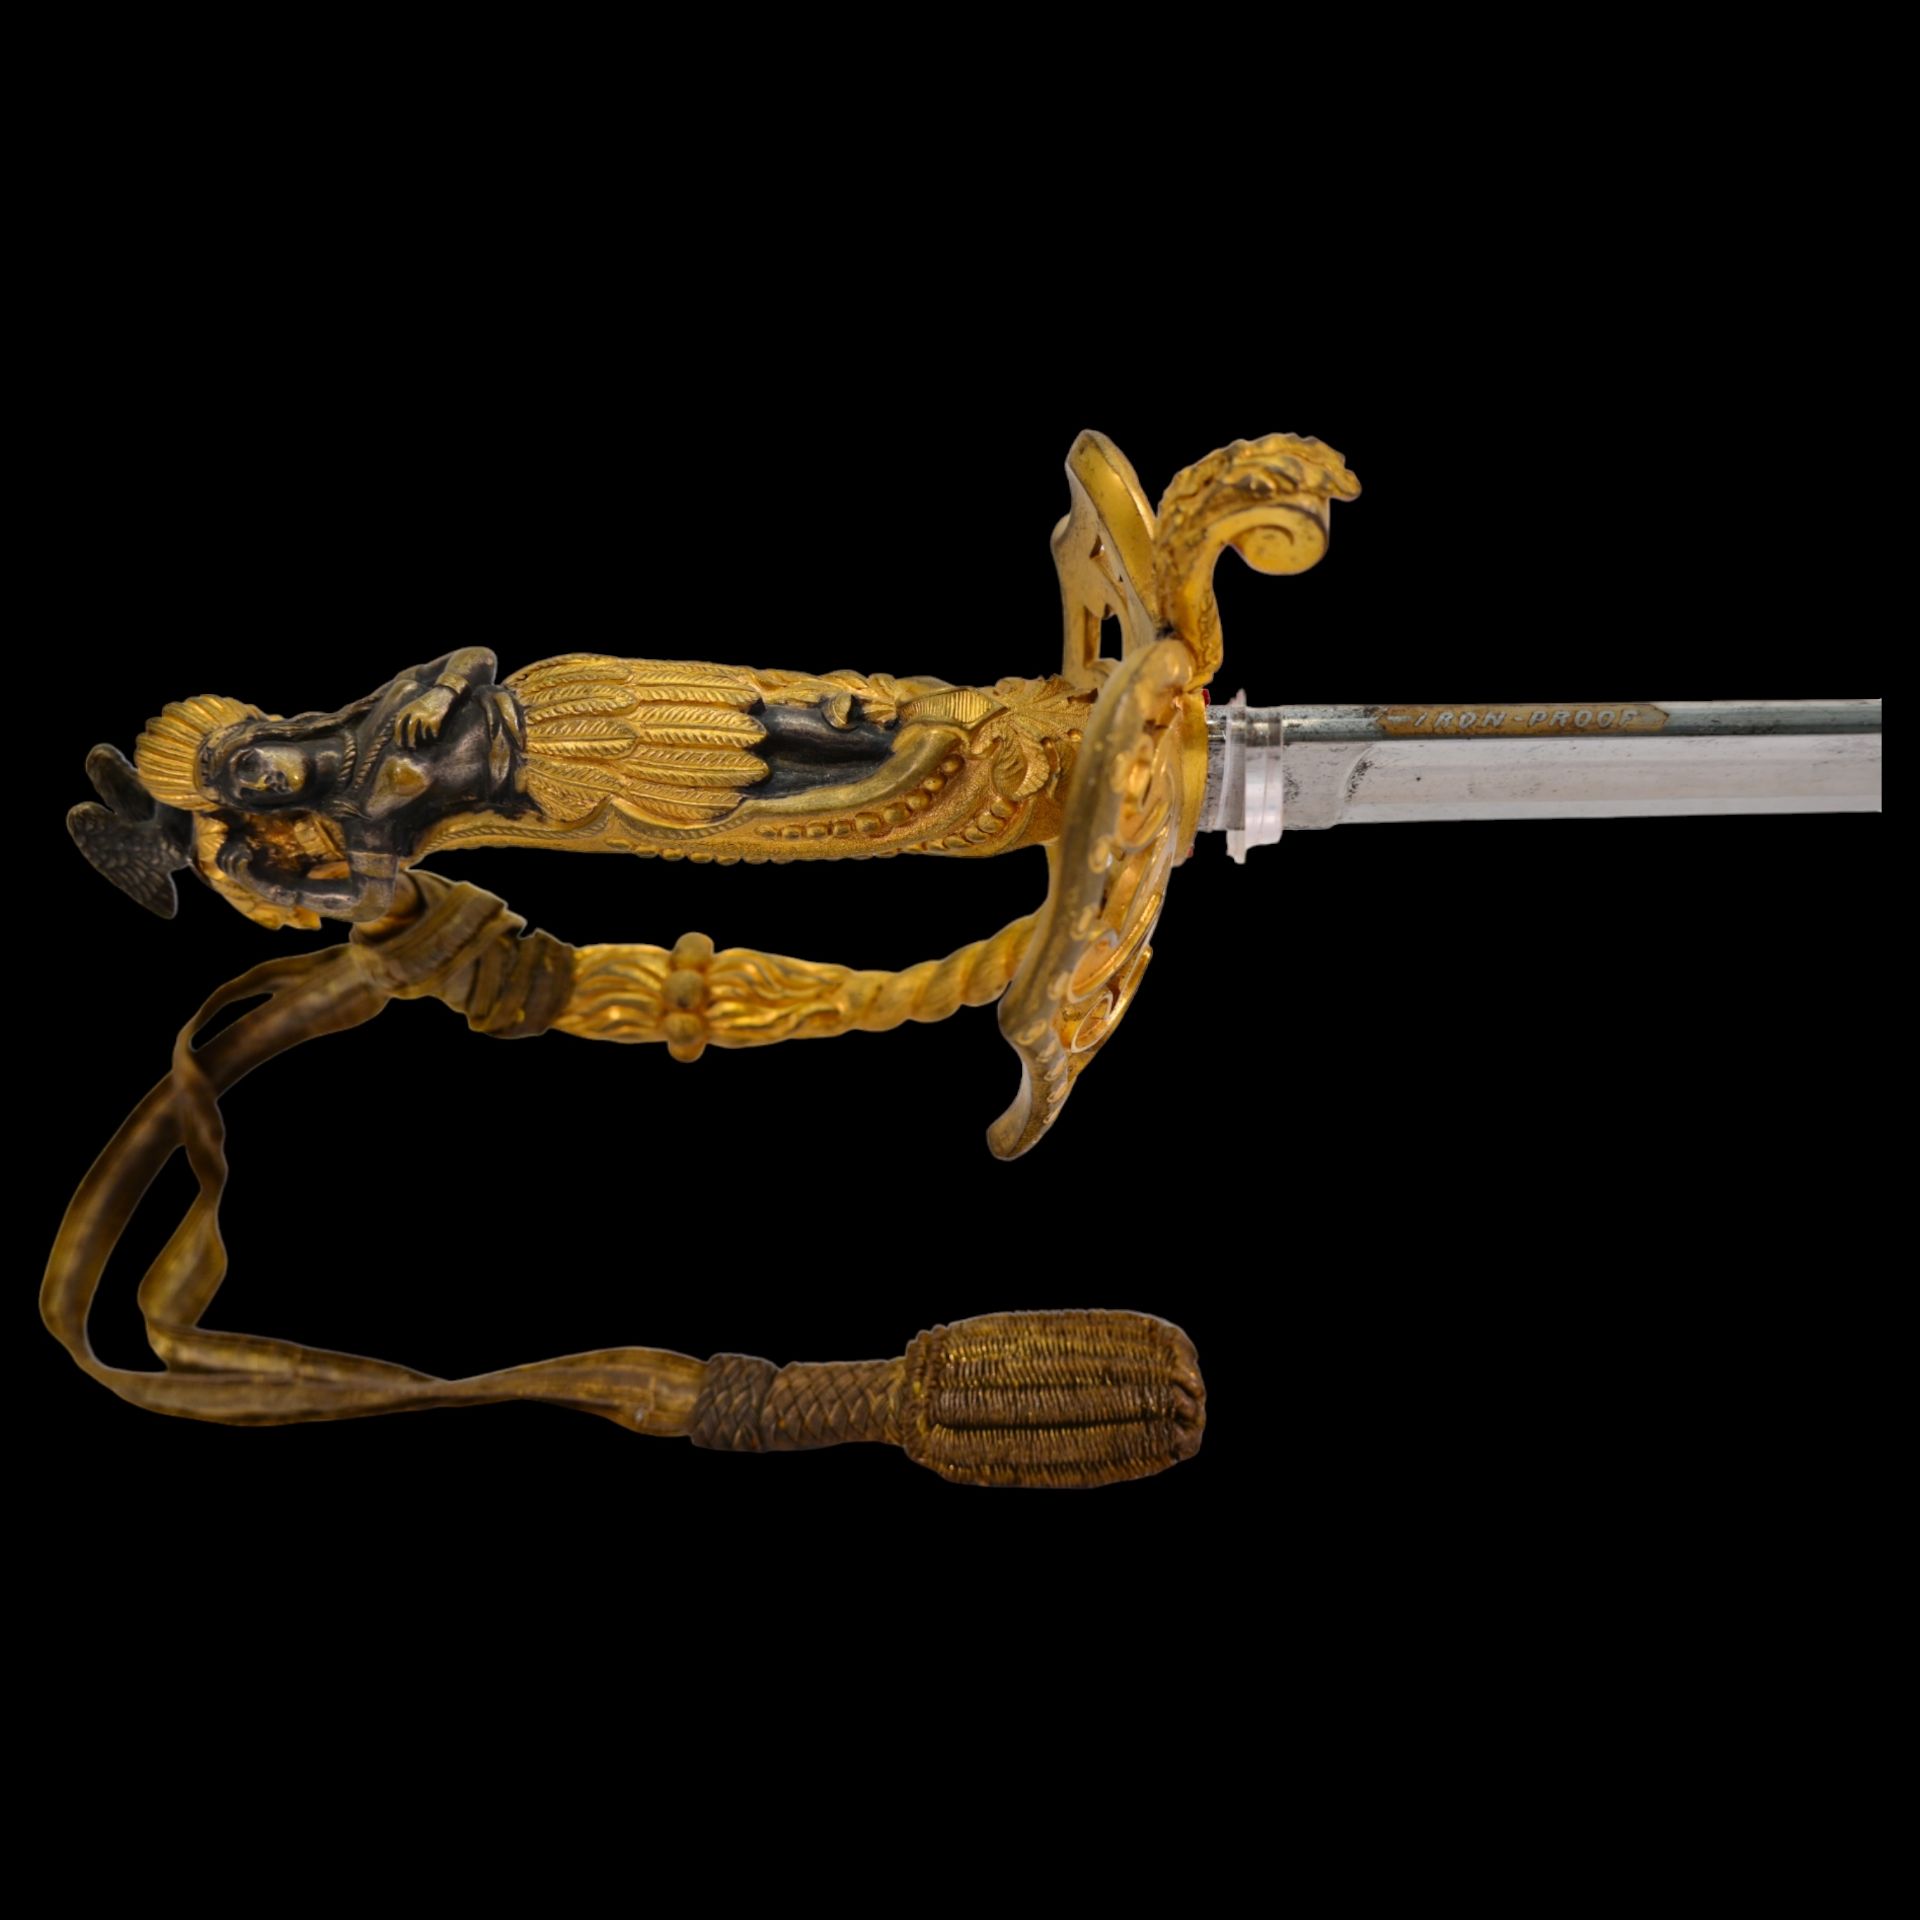 Magnificent "Schuyler Hartley & Graham" Indian Maiden Sword with Civil War Related Presentation. - Image 11 of 20